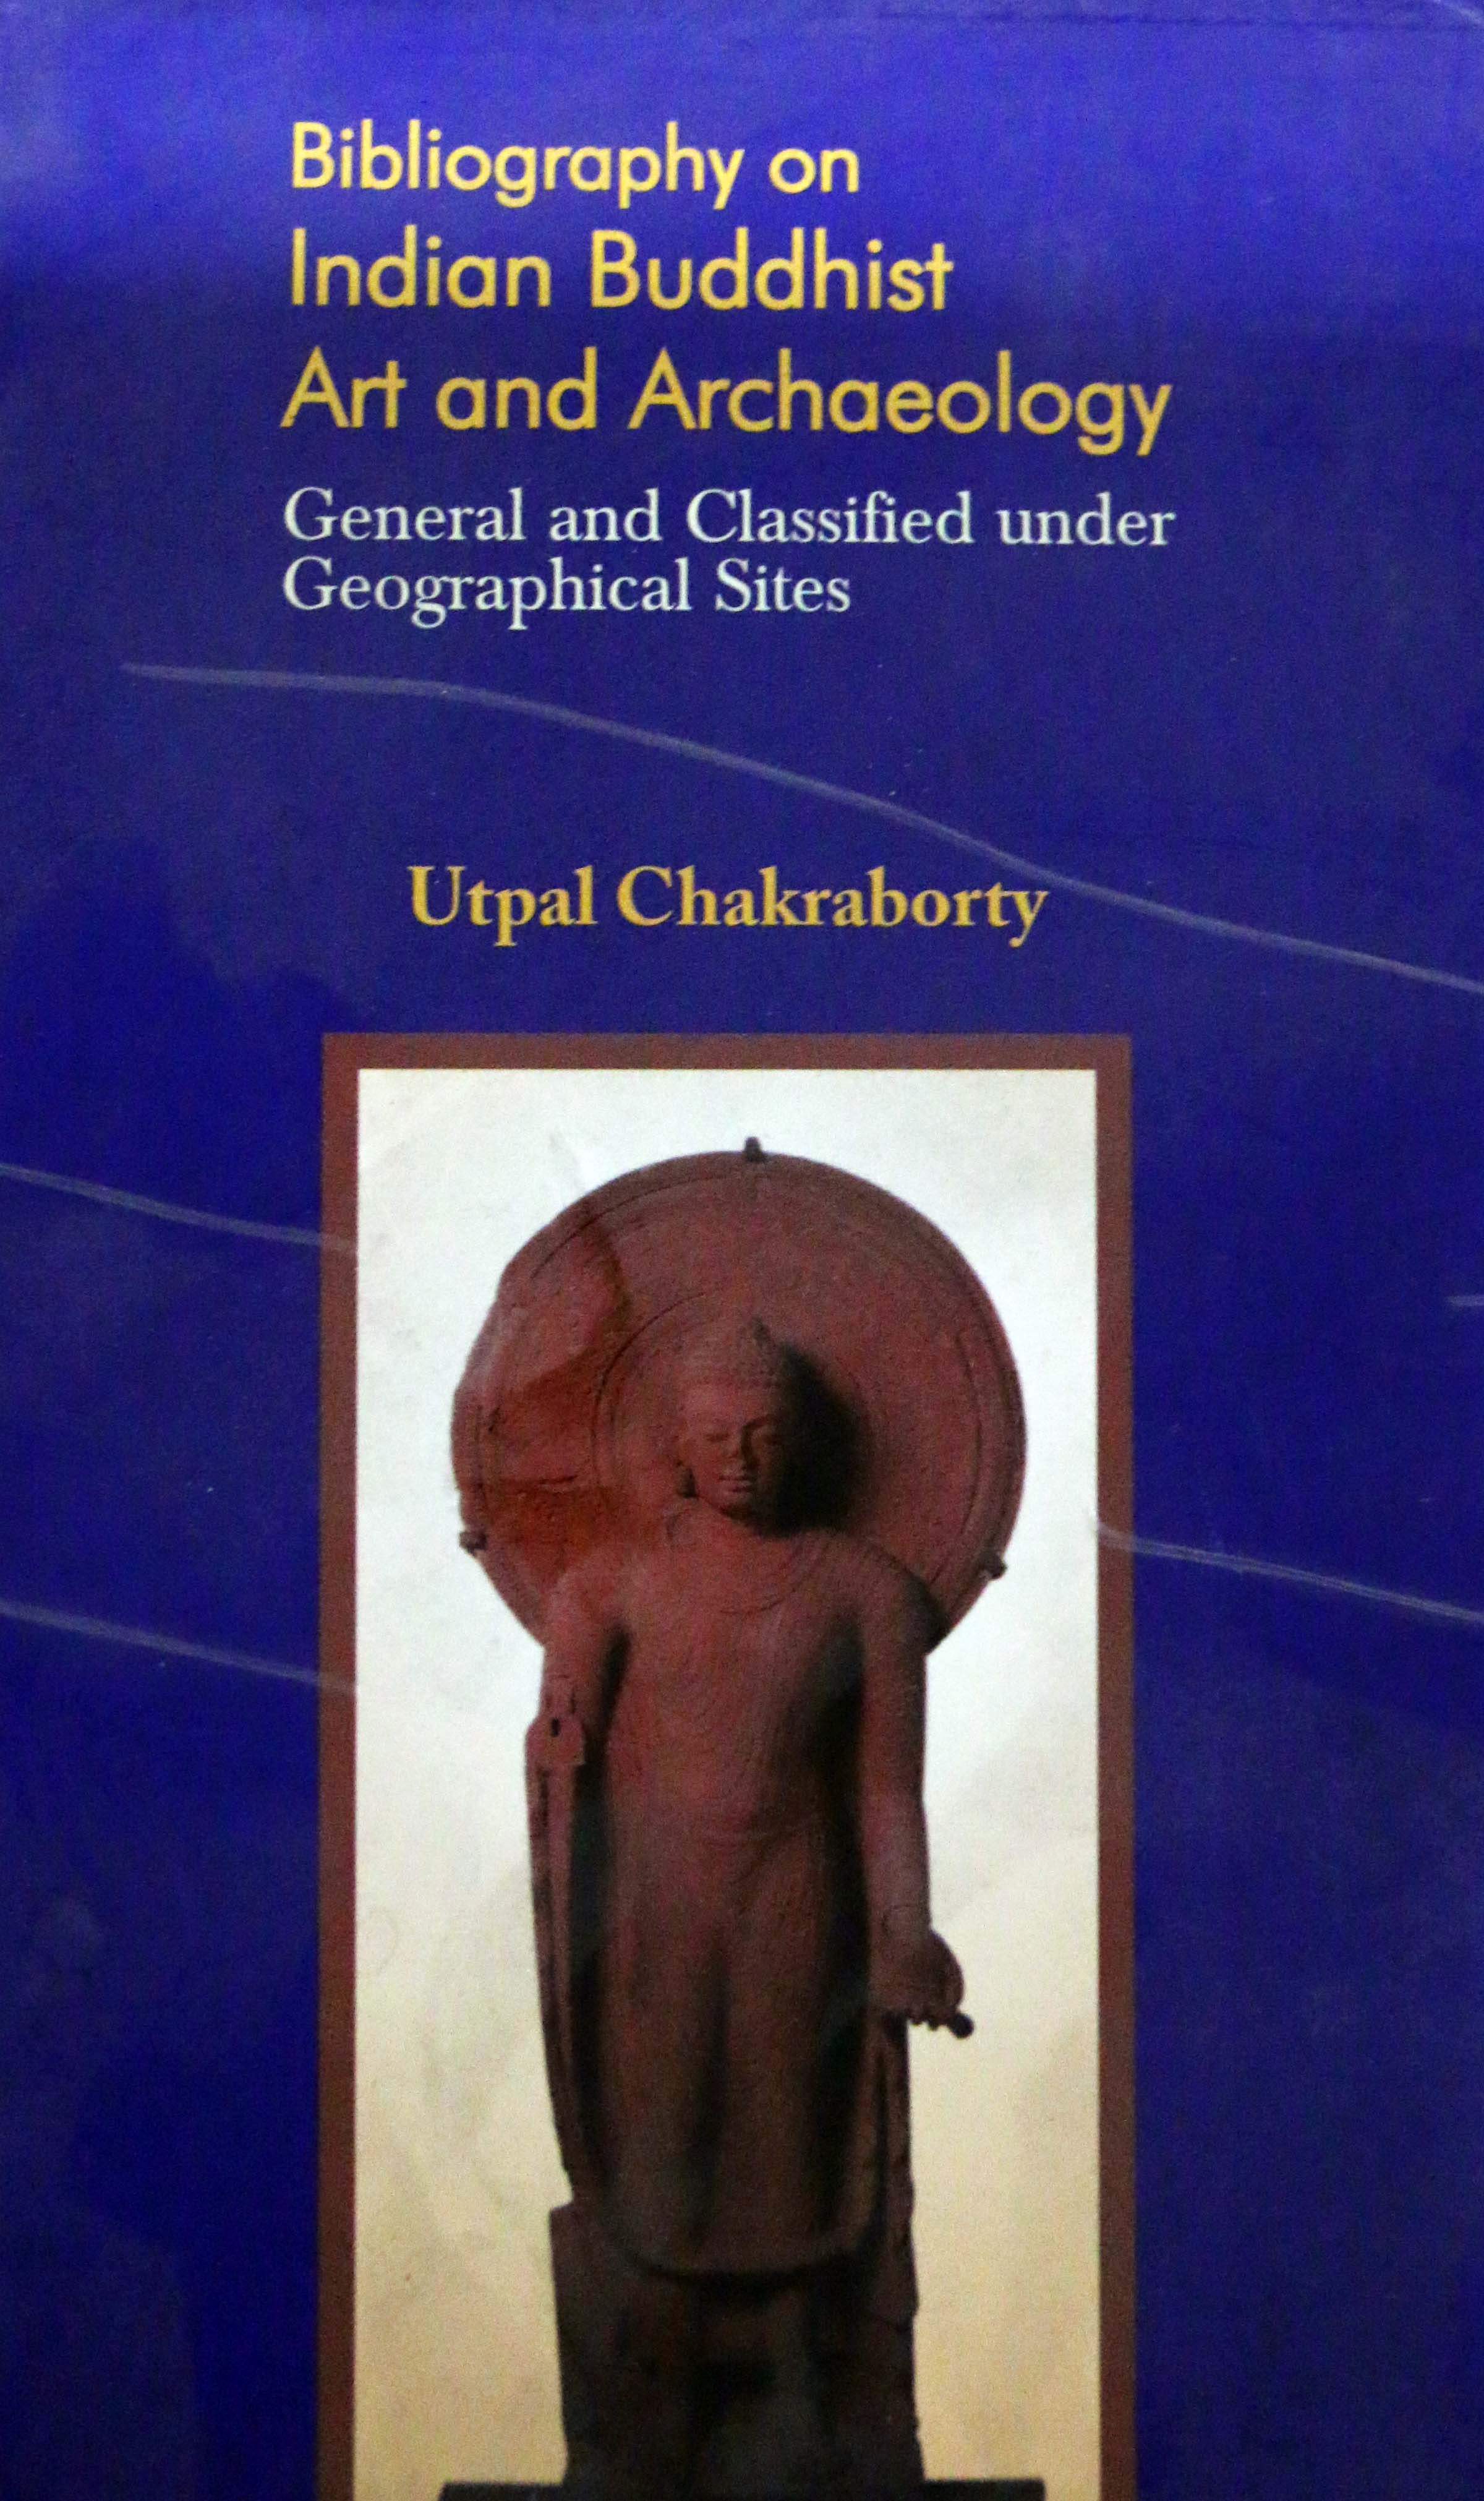 Bibliography of Indian Art and Archaeology